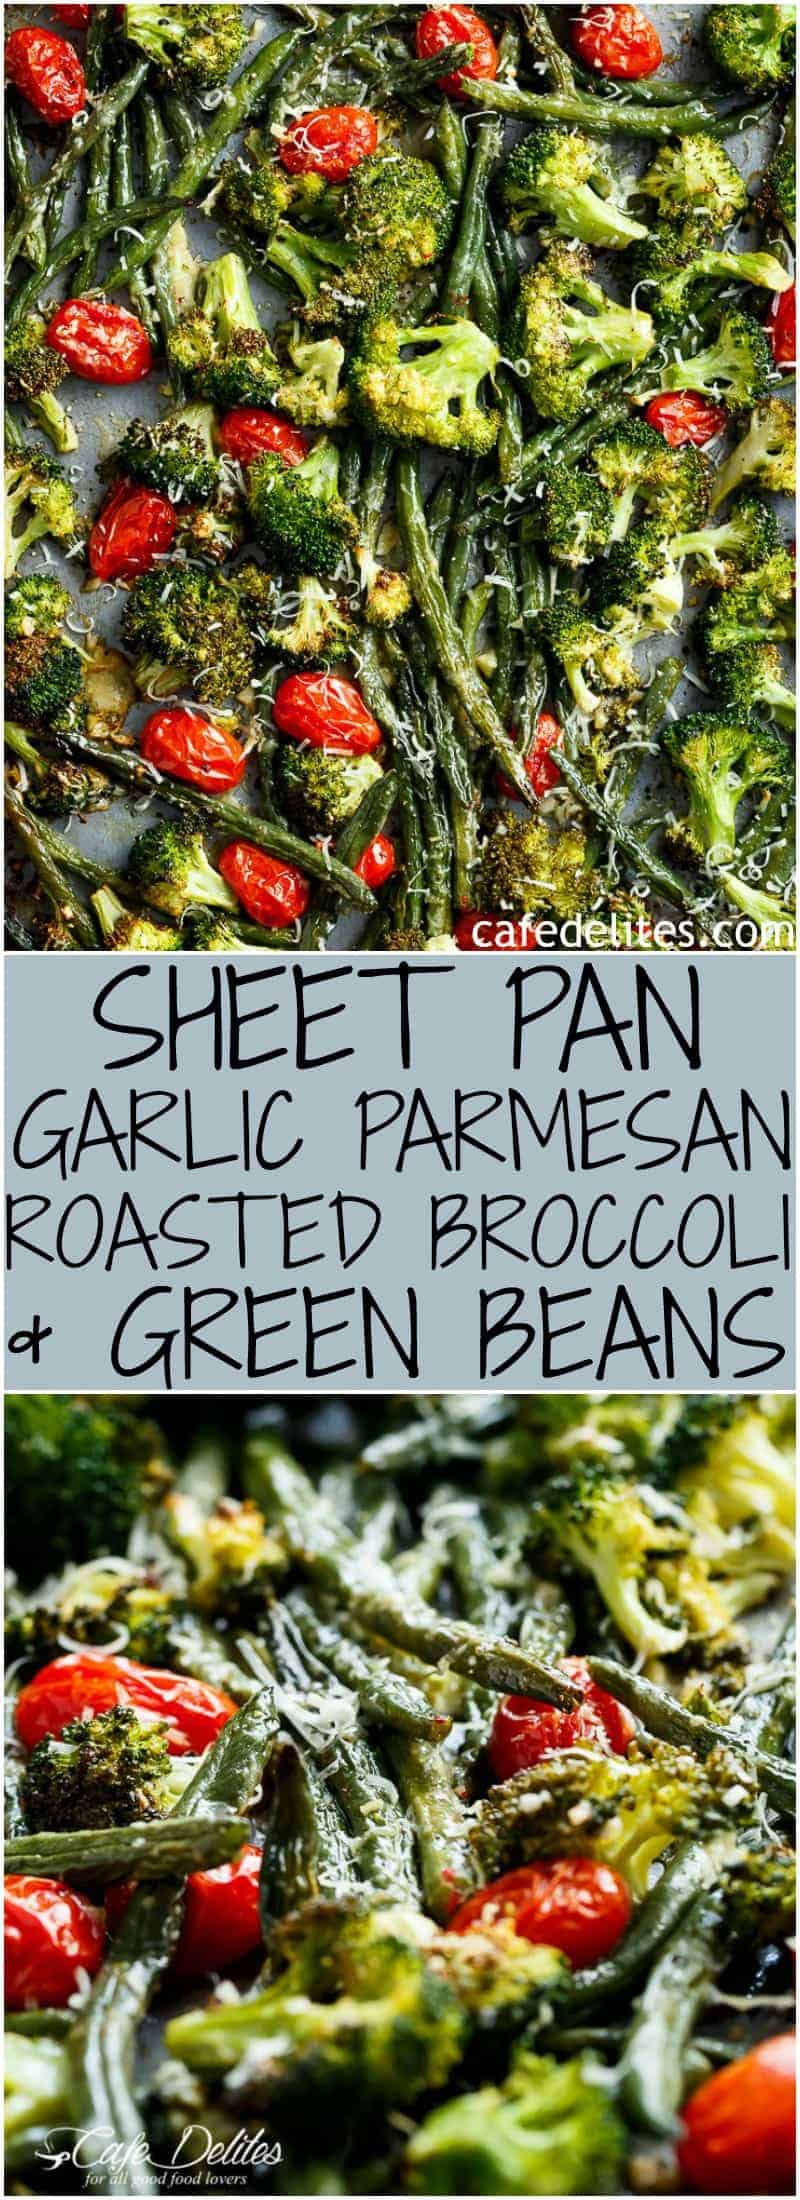 Sheet Pan Garlic Parmesan Roasted Broccoli & Green Beans is an easy-to-make and easier to eat side dish for any meal! A family and reader favourite! | https://cafedelites.com